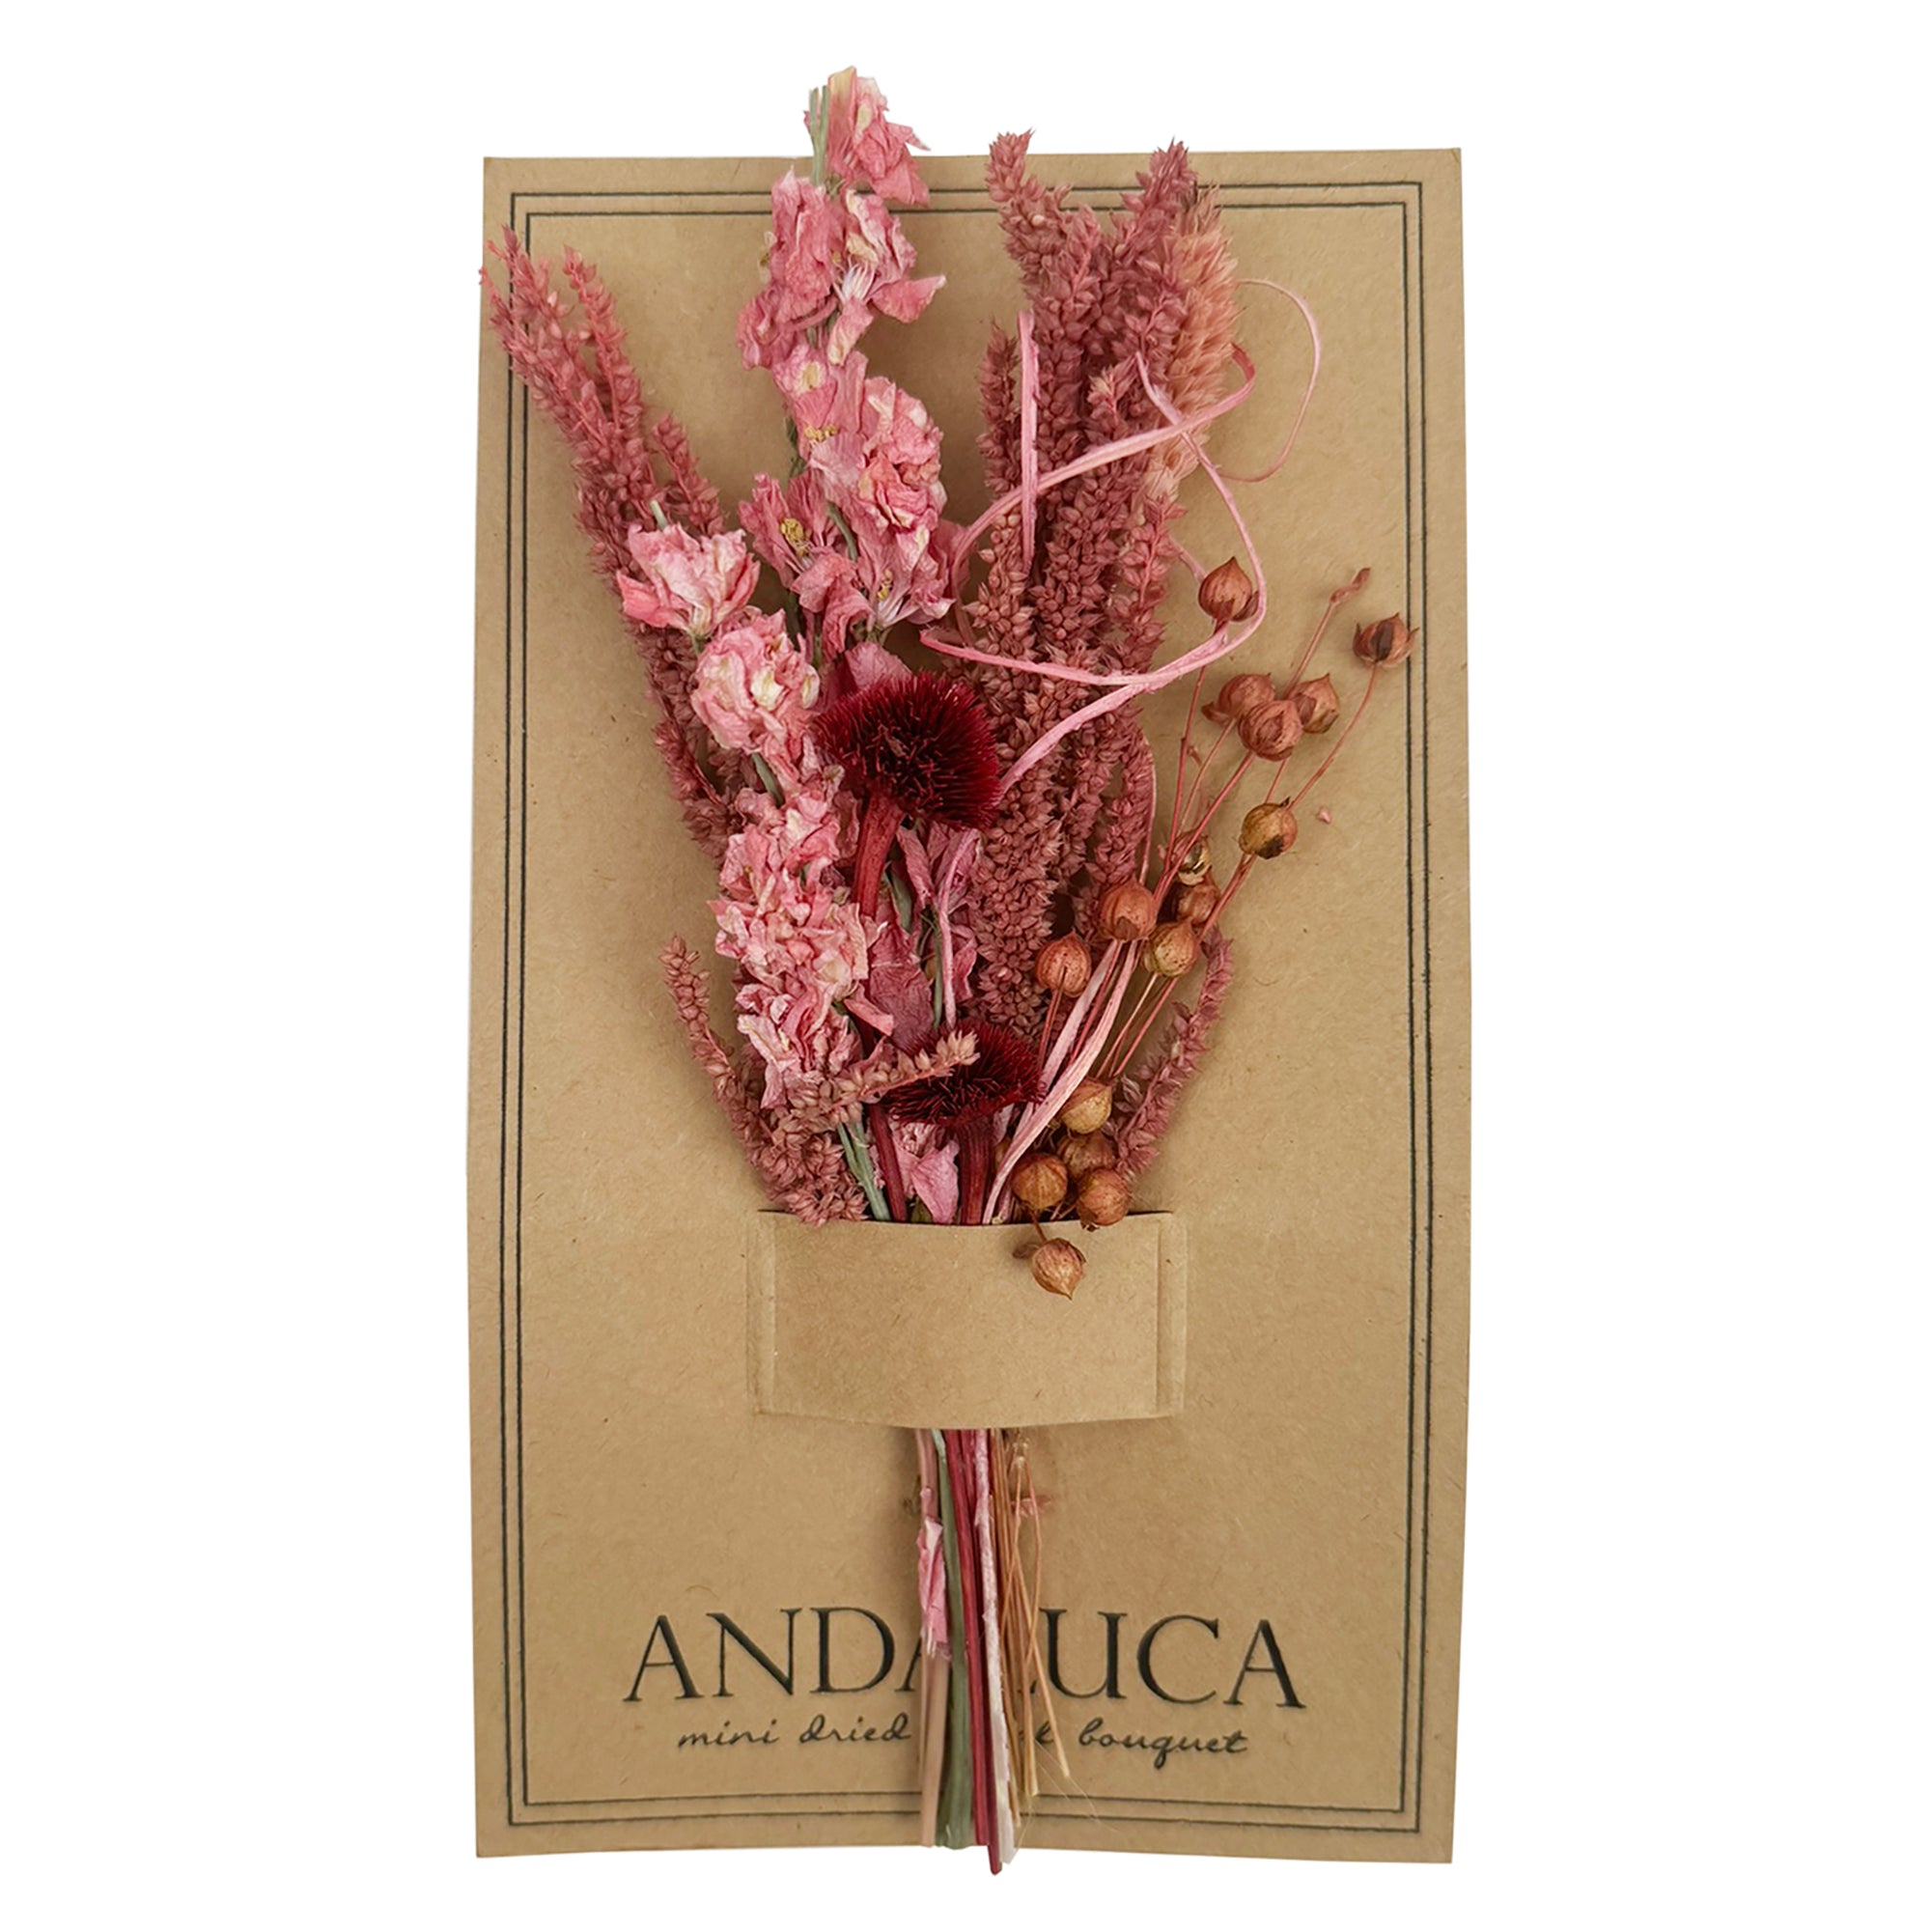 Mini bouquet of pink flowers and grains.